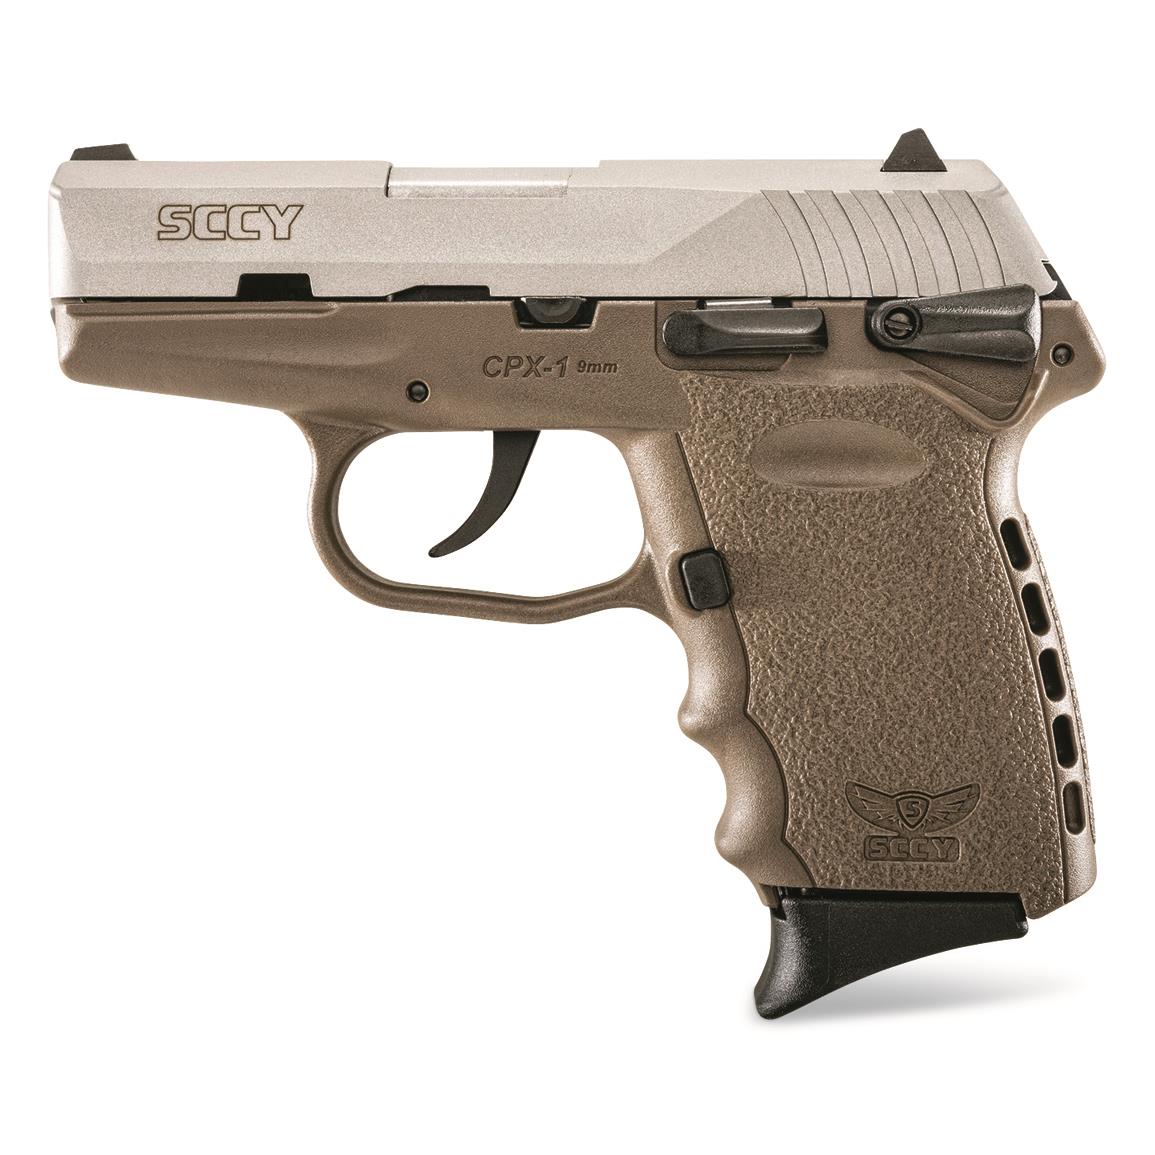 SCCY CPX-1, Semi-automatic, 9mm, 3.1" Barrel, FDE/Stainless, 10+1 Rounds